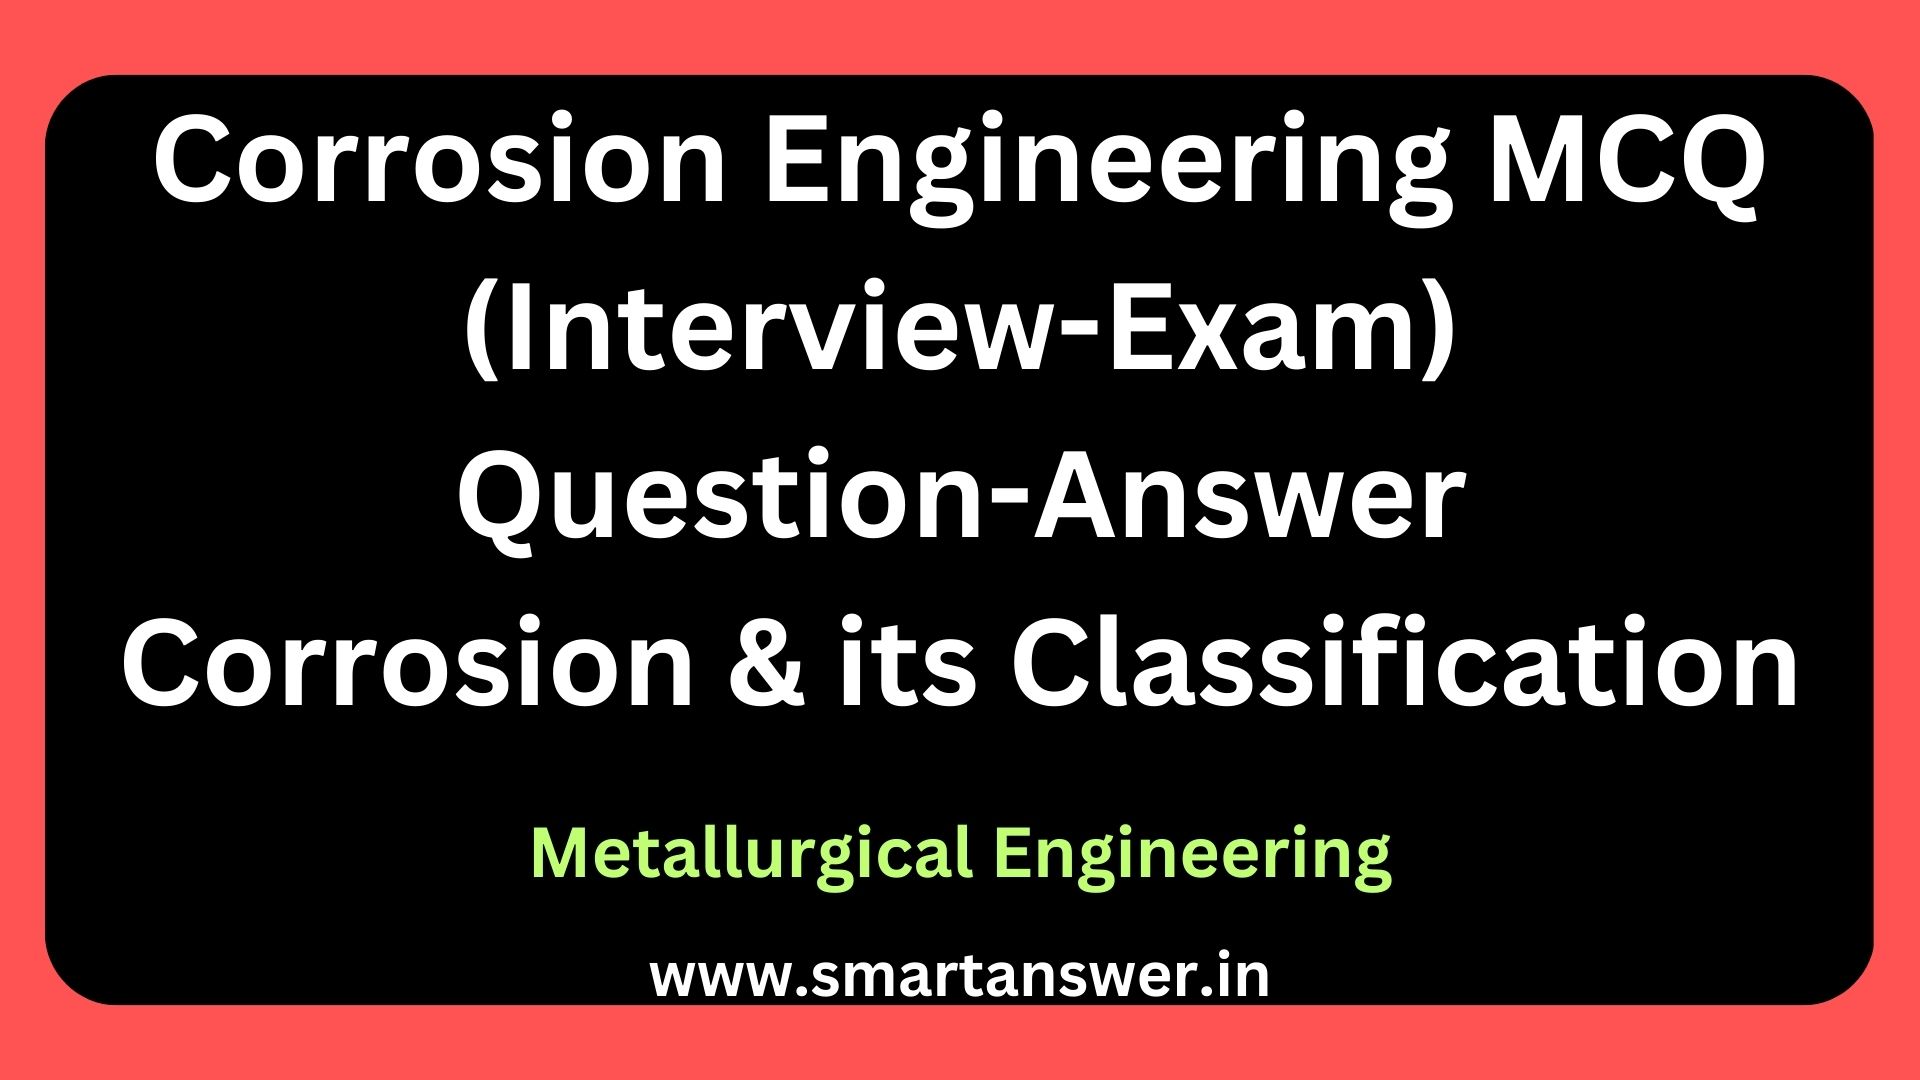 Corrosion Engineering MCQ (Interview-Exam) Question-Answer - Corrosion and its Classification – 1